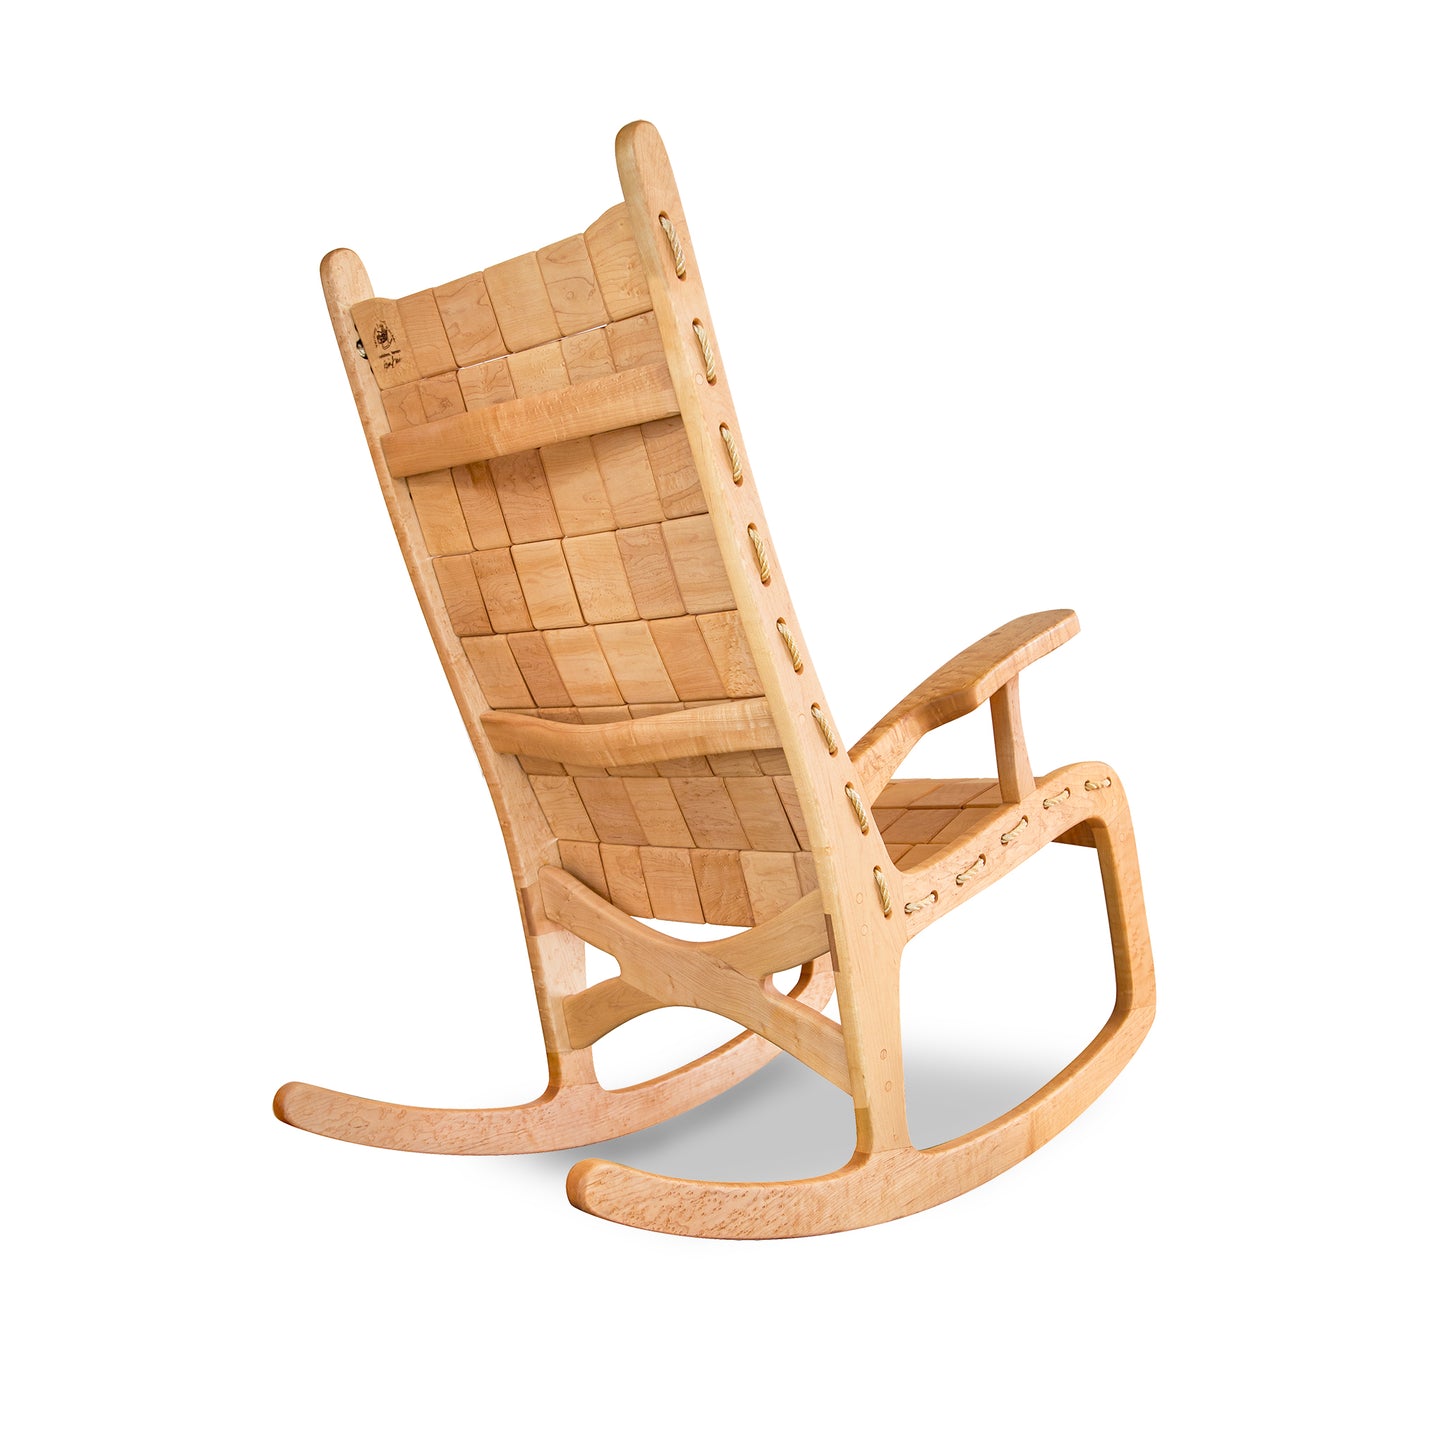 A wooden Vermont Folk Rocker rocking chair made from birdseye maple with a quilted seat and backrest, angled back for comfort, and smoothly curved rockers. The chair is set against a white background.